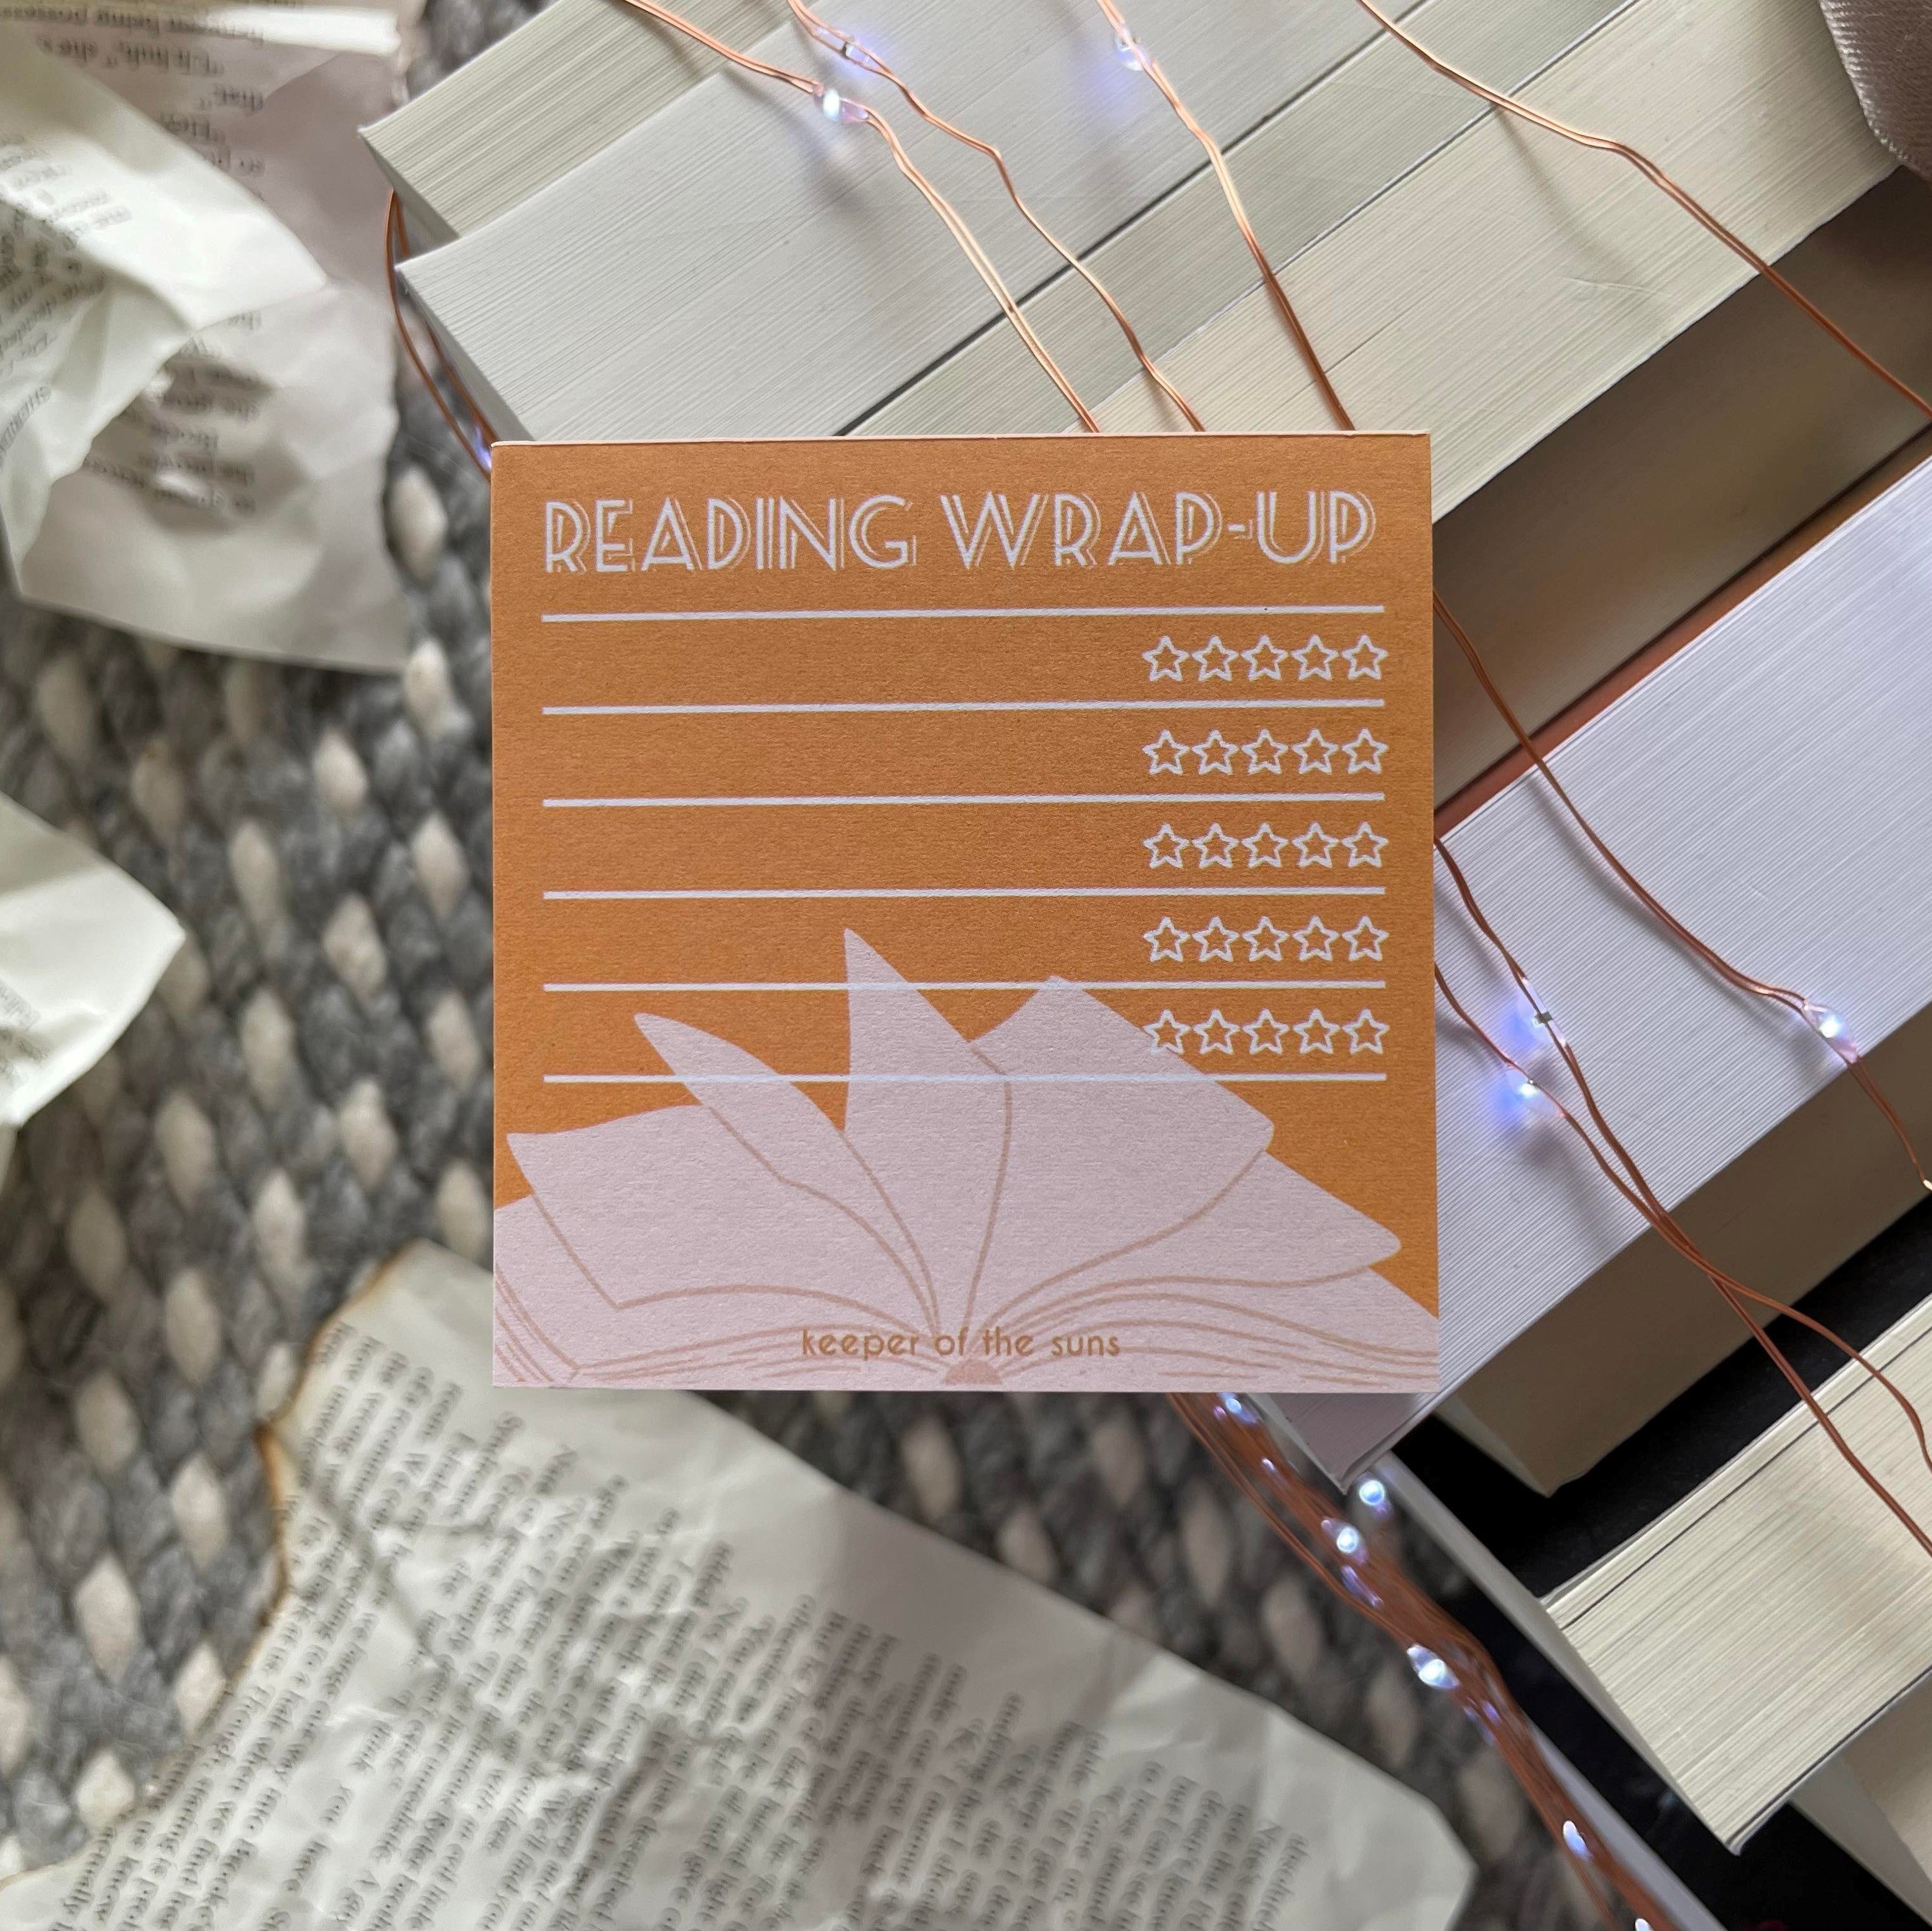 Reading Wrap-Up TRACKER | 50 Sheet Memo Pad by Keeper of the Suns